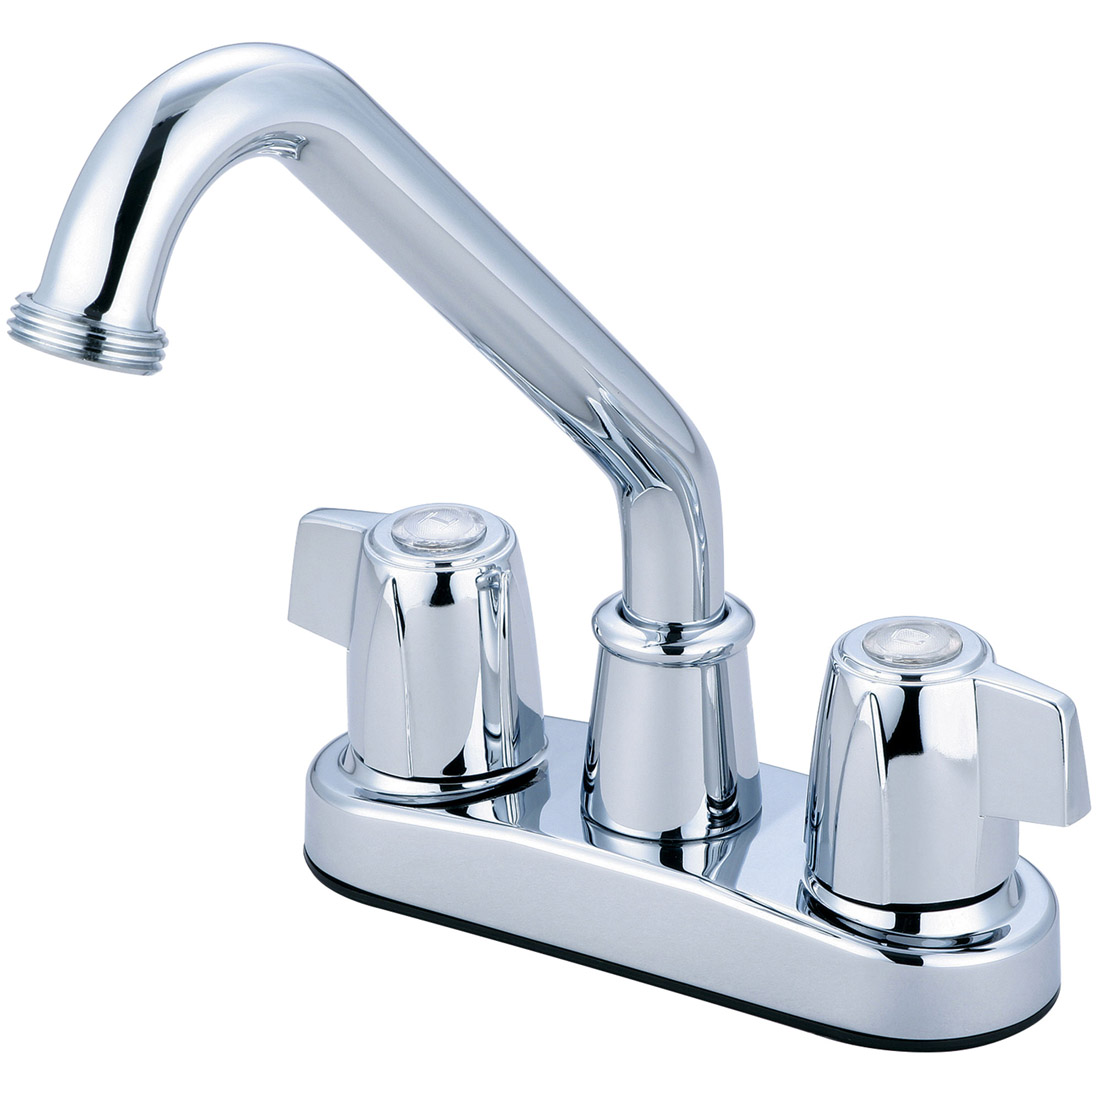 Two Handle Bar Laundry Faucet Pioneer Industries